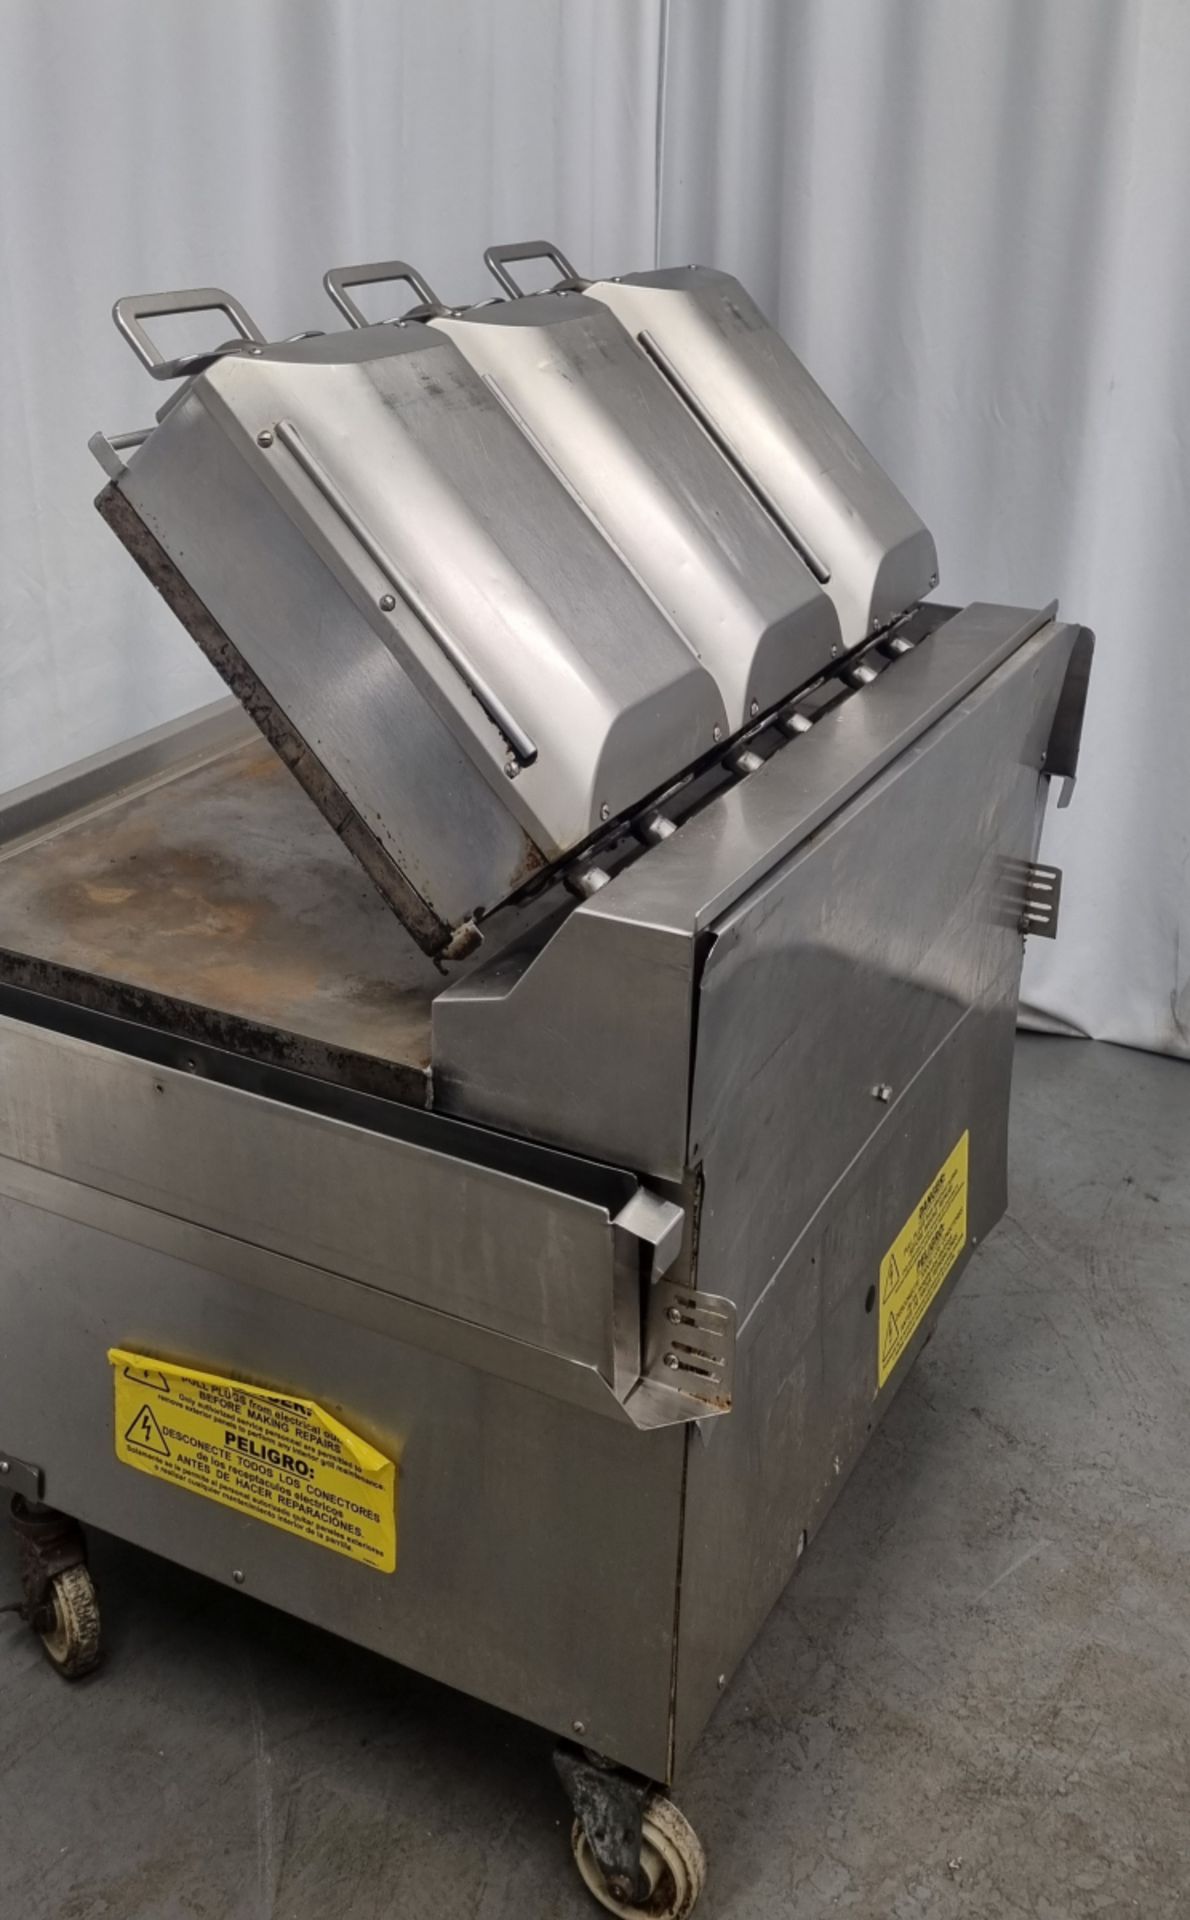 Taylor Commercial Foodservice stainless steel three zone clamshell grill - Image 7 of 11